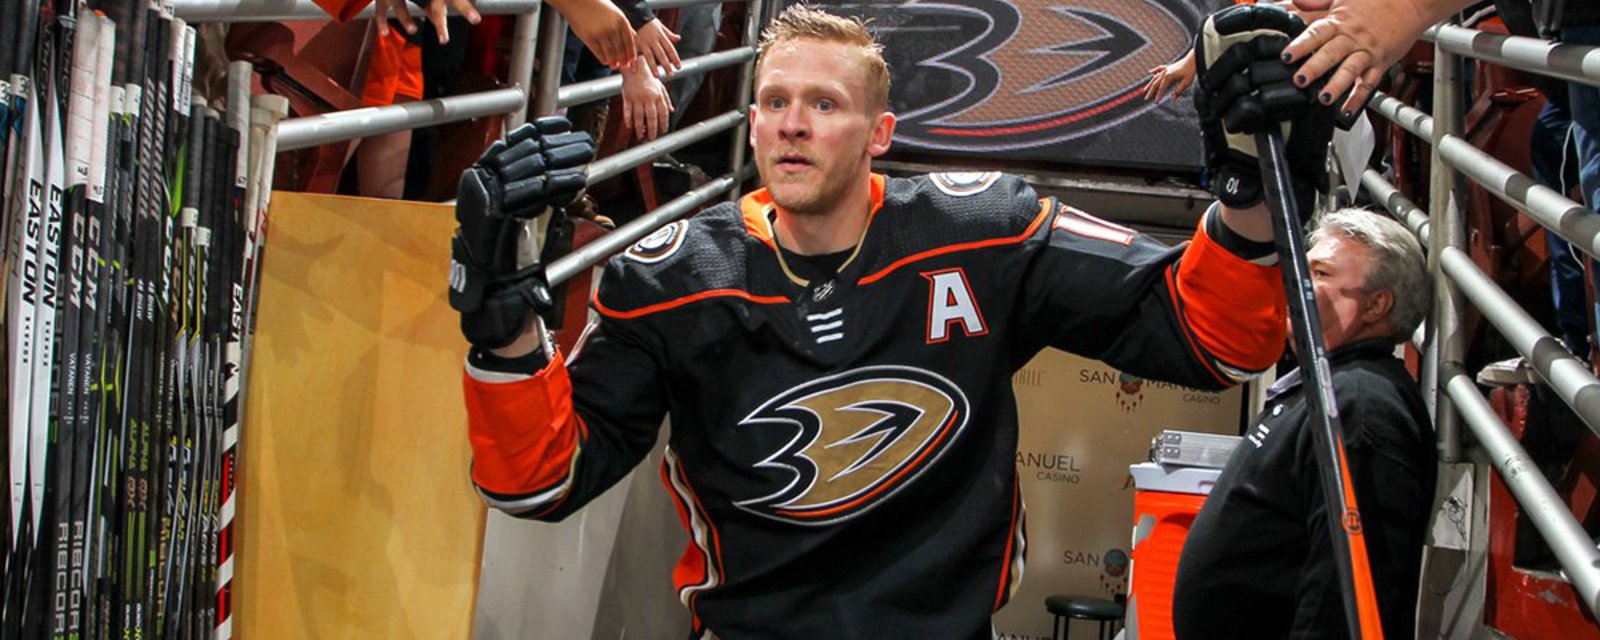 Corey Perry speaks out, makes excuses for himself following Ducks’ buyout